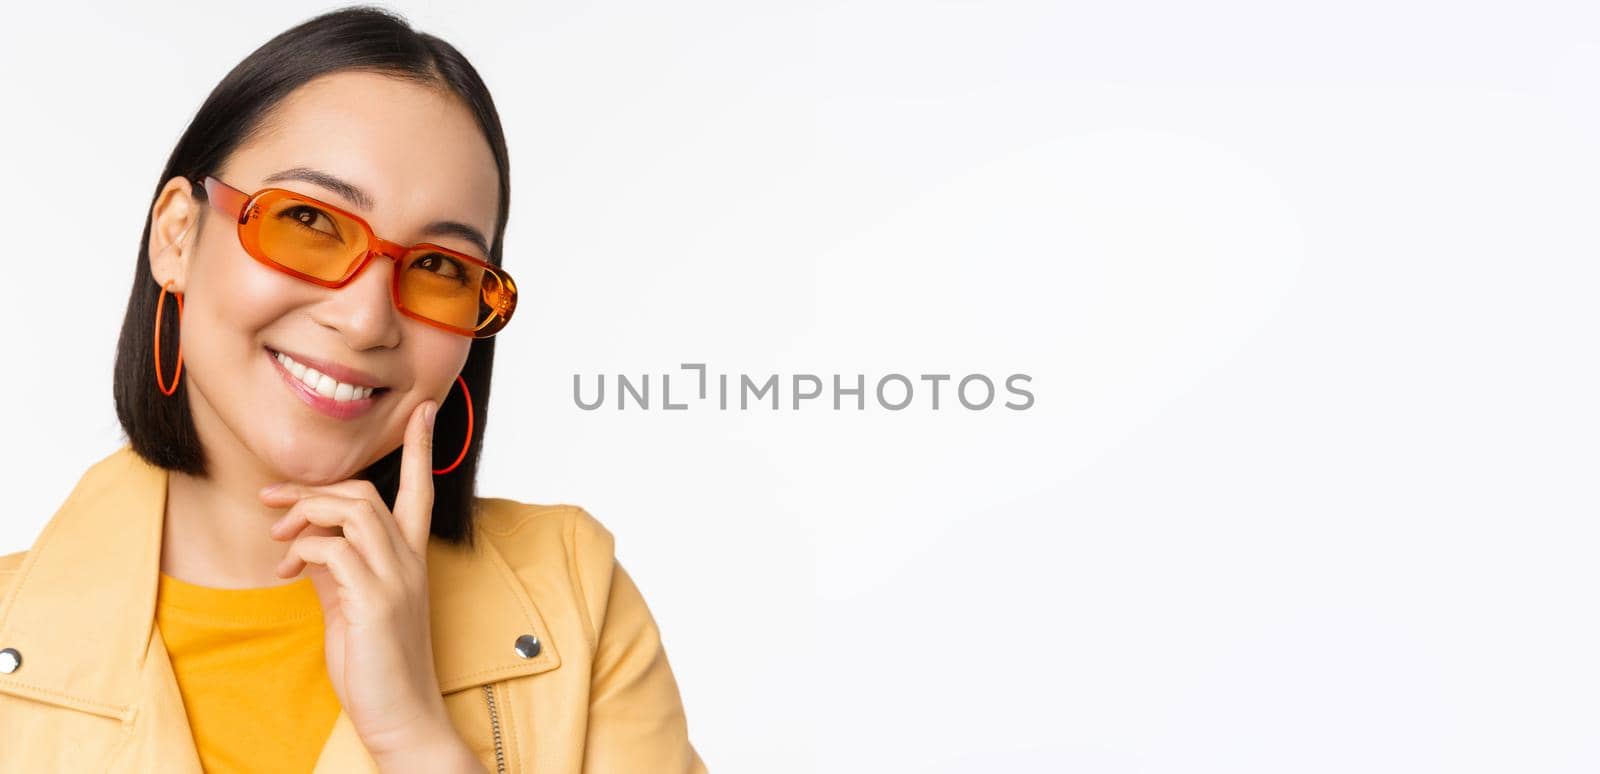 Close up portrait of asian woman thinking, wearing sunglasses and smiling, looking up thoughtful, standing over white studio background. Copy space